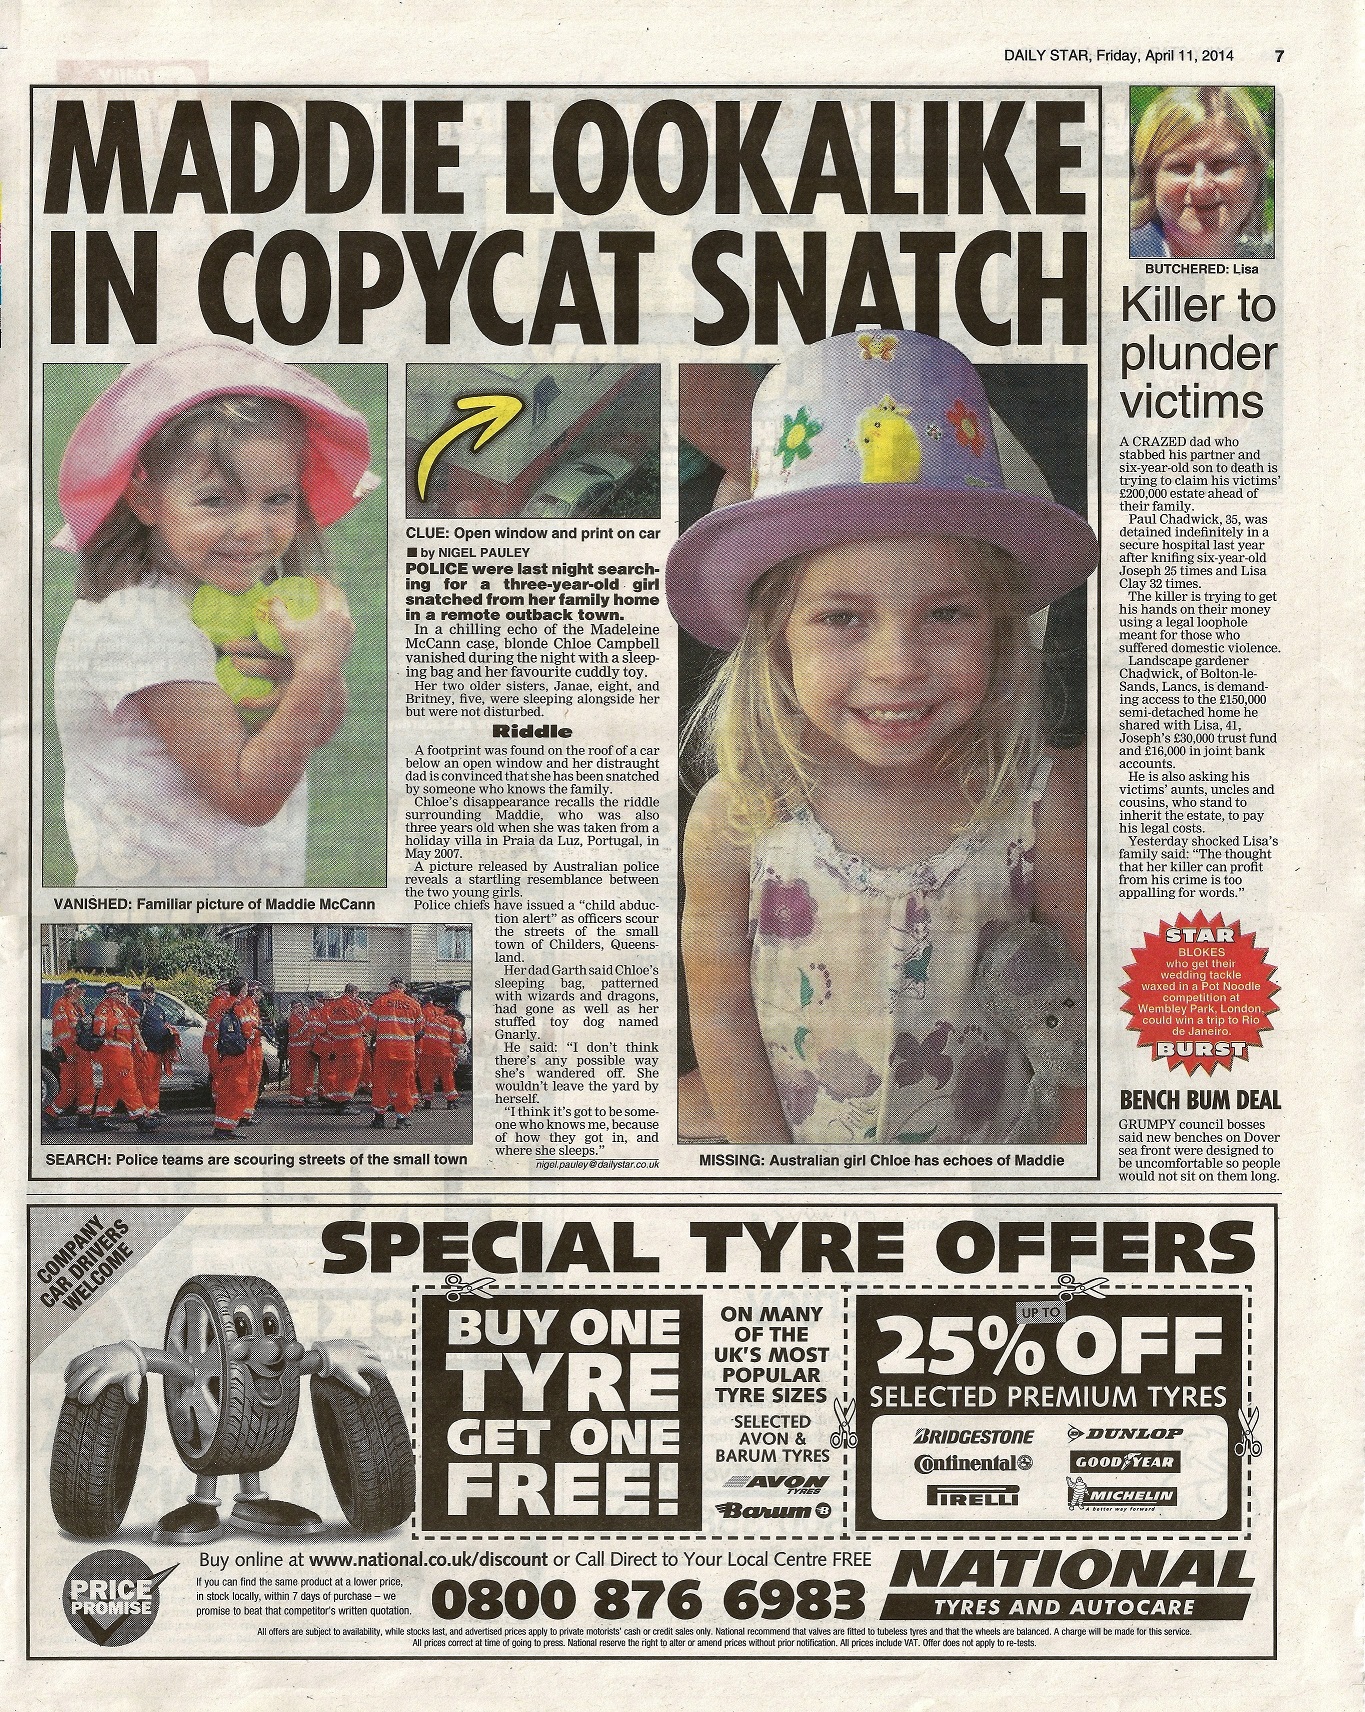 Daily Star, 11 April 2014, page 7